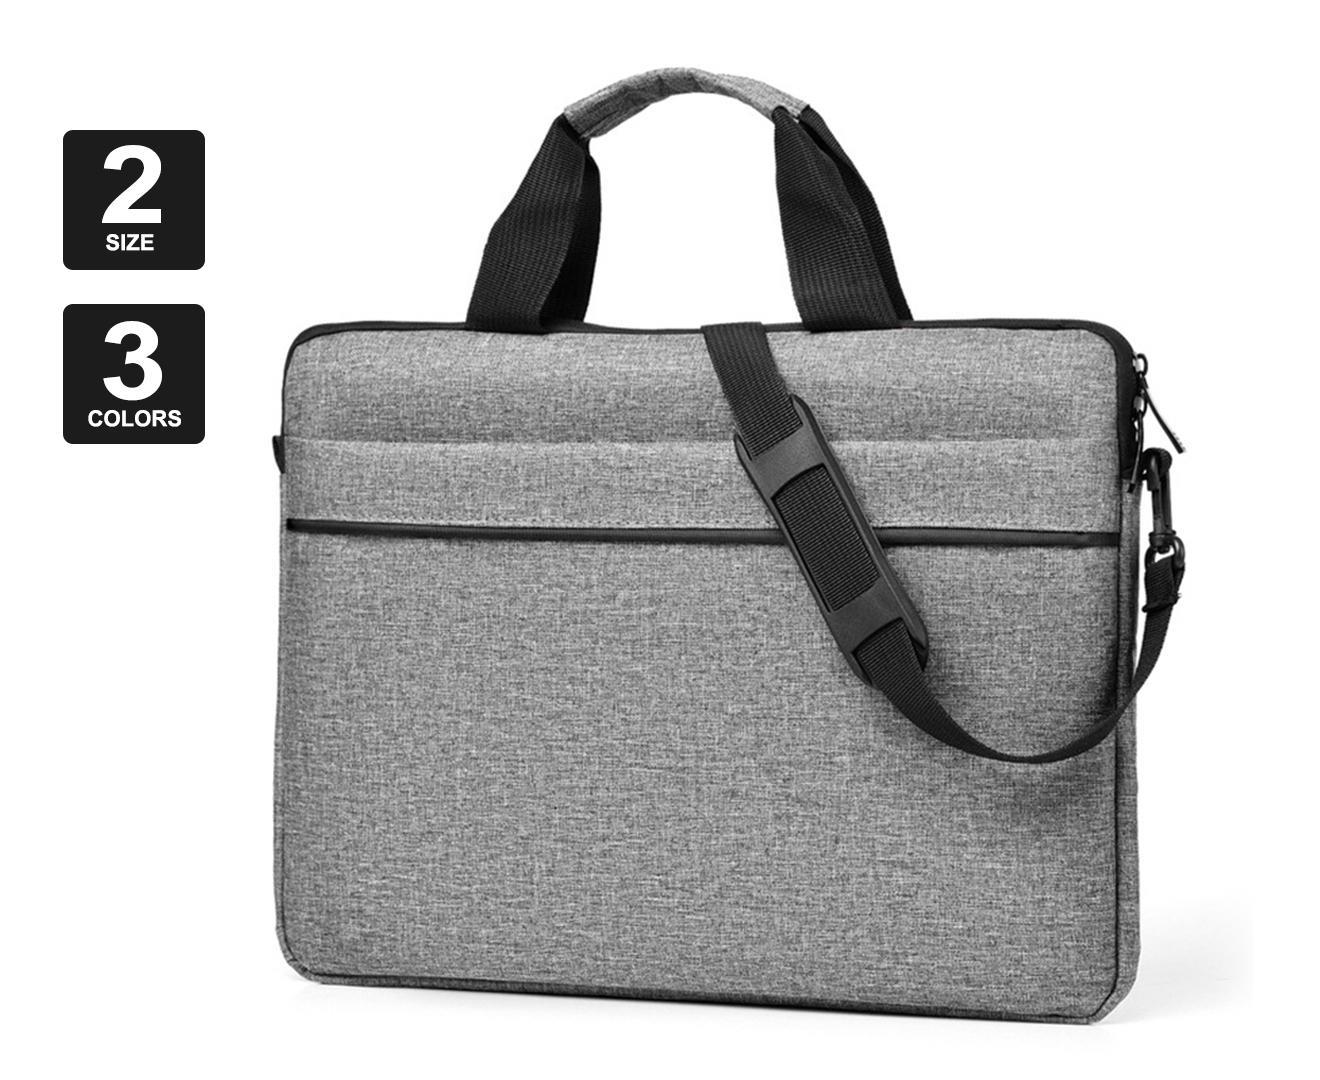 Vivva Laptop Sleeve Carry Case Cover Bag For Macbook HP Dell 15.6" Notebook - Grey